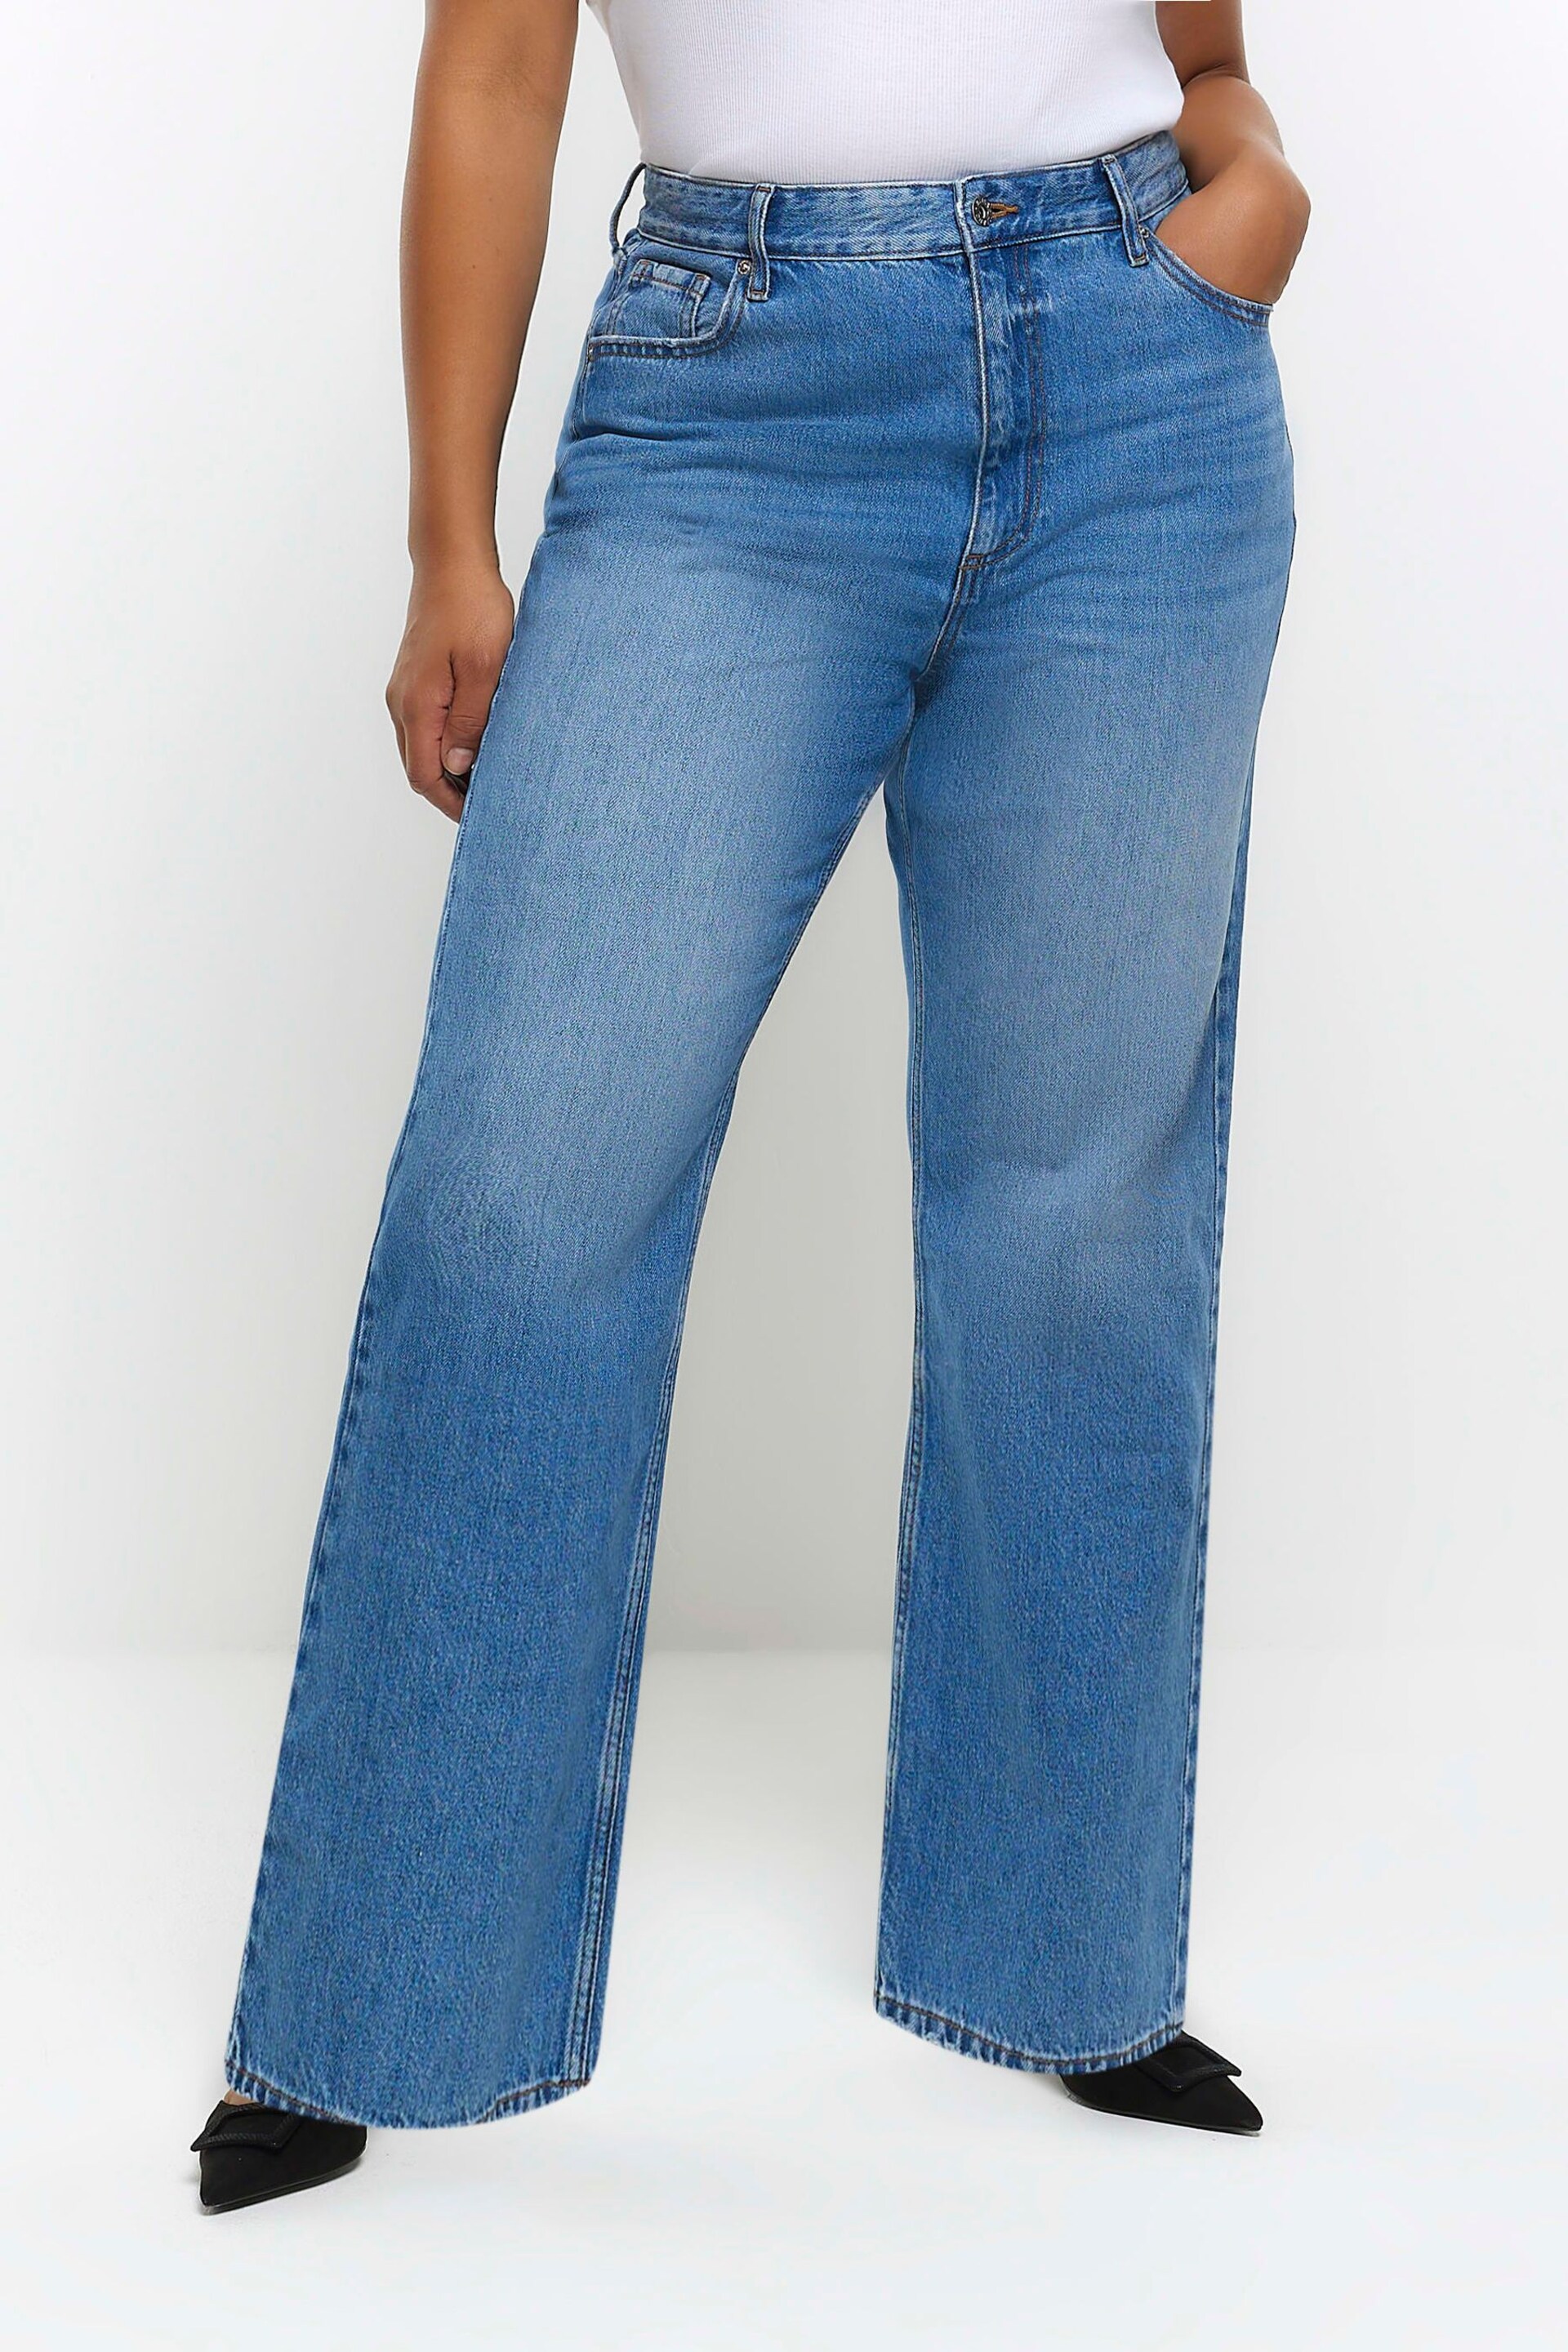 River Island Blue Curve 90s Long Straight Leg High Rise Jeans - Image 1 of 5